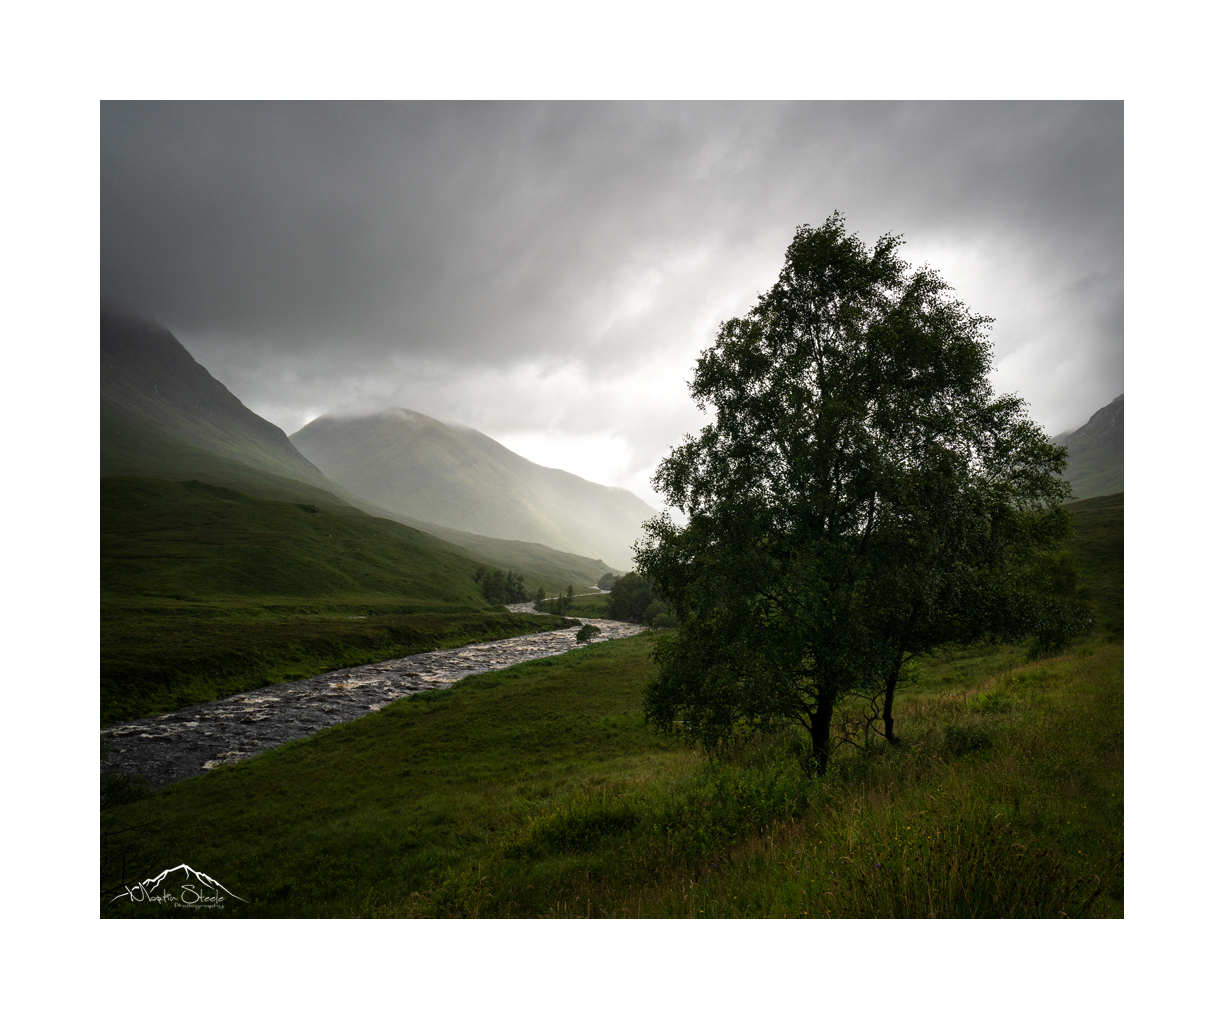 The River Etive flowing into the light